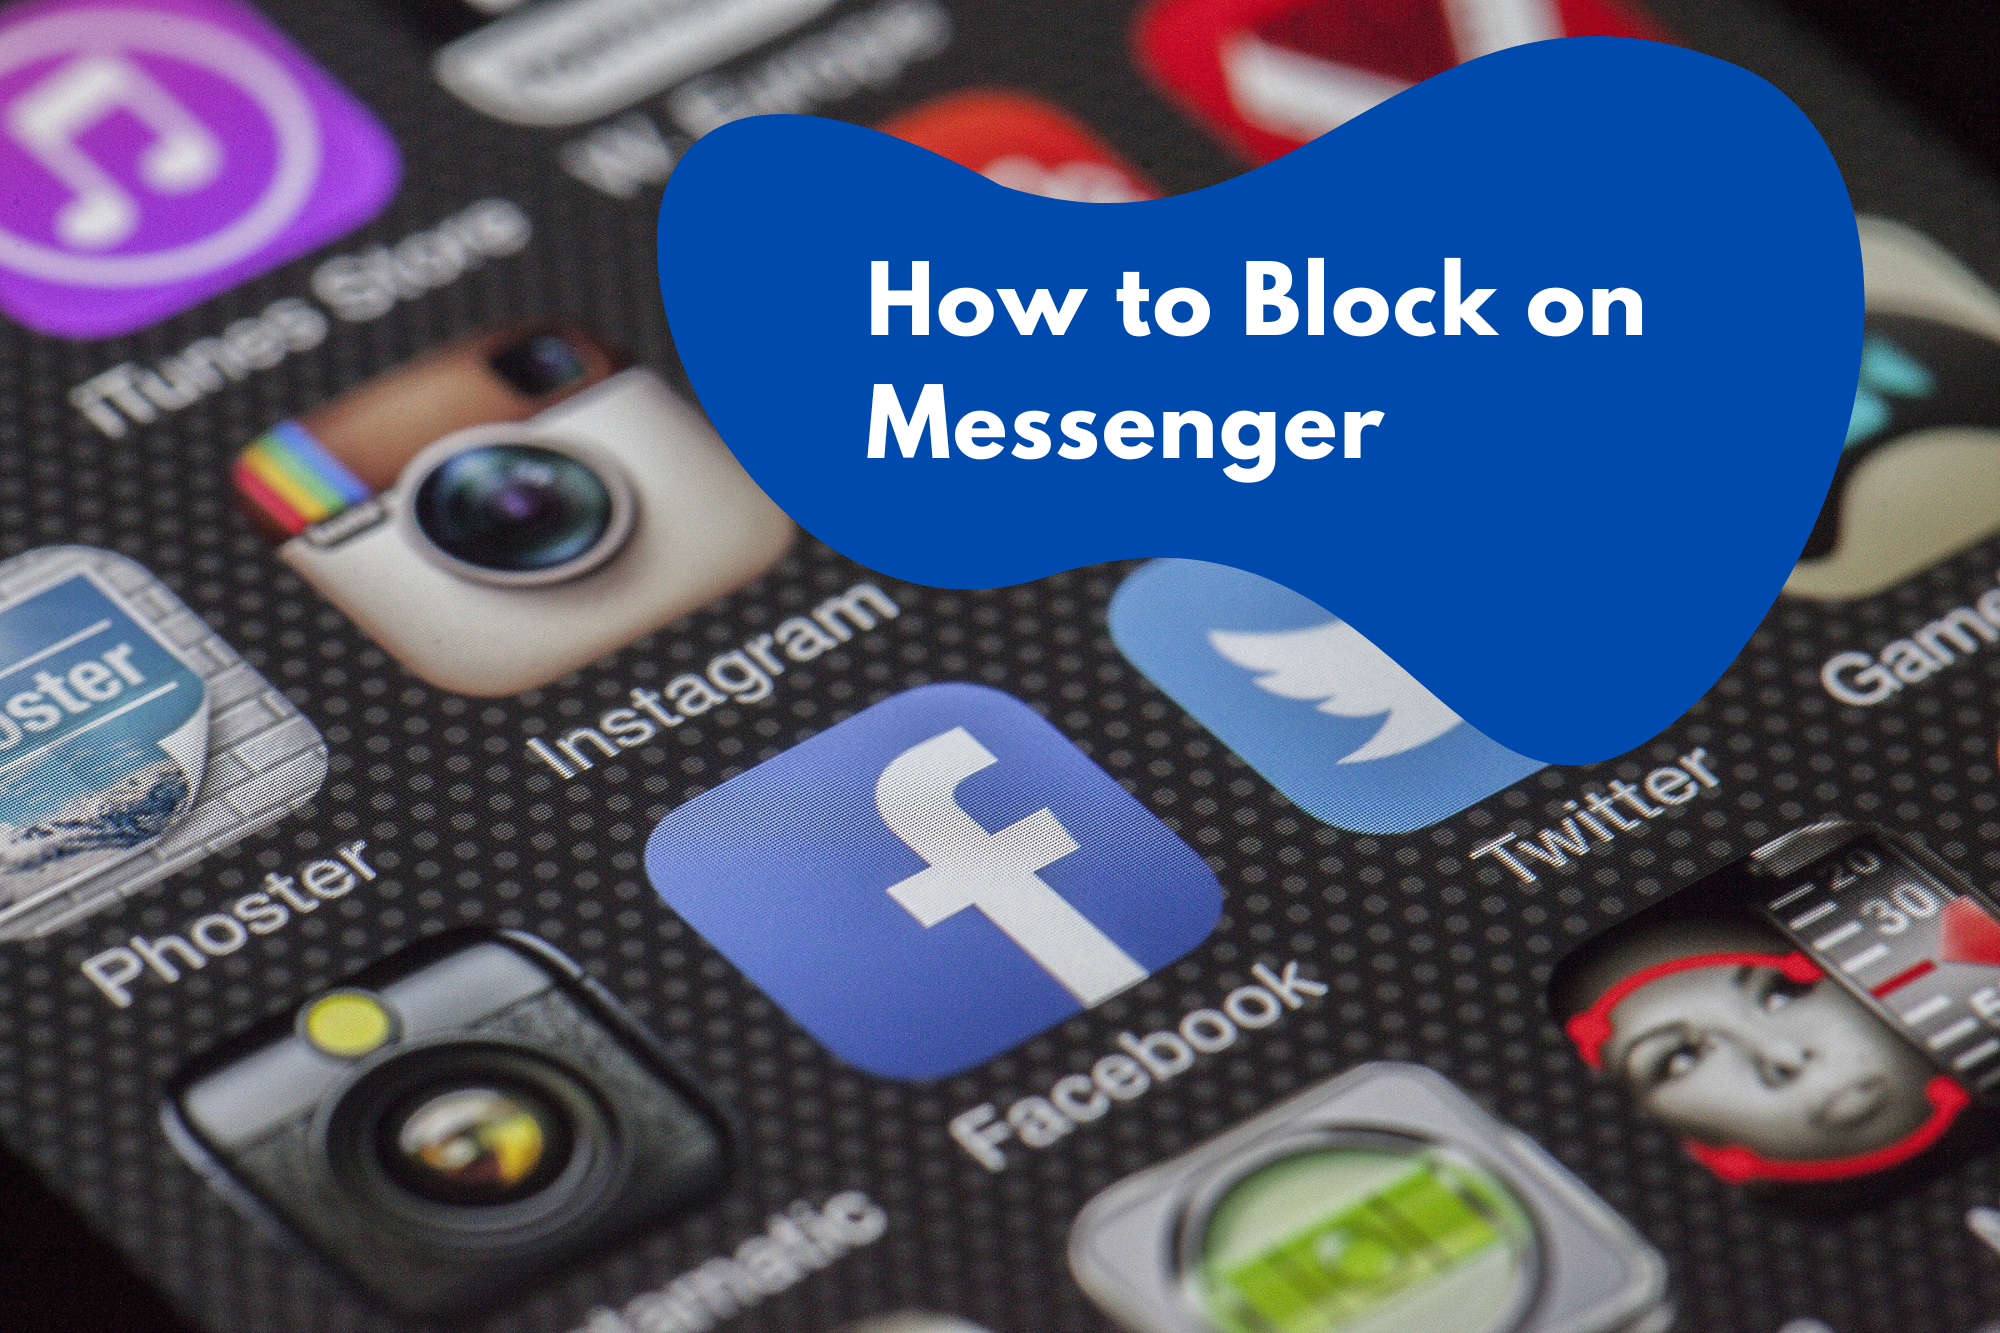 How to Block on Messenger